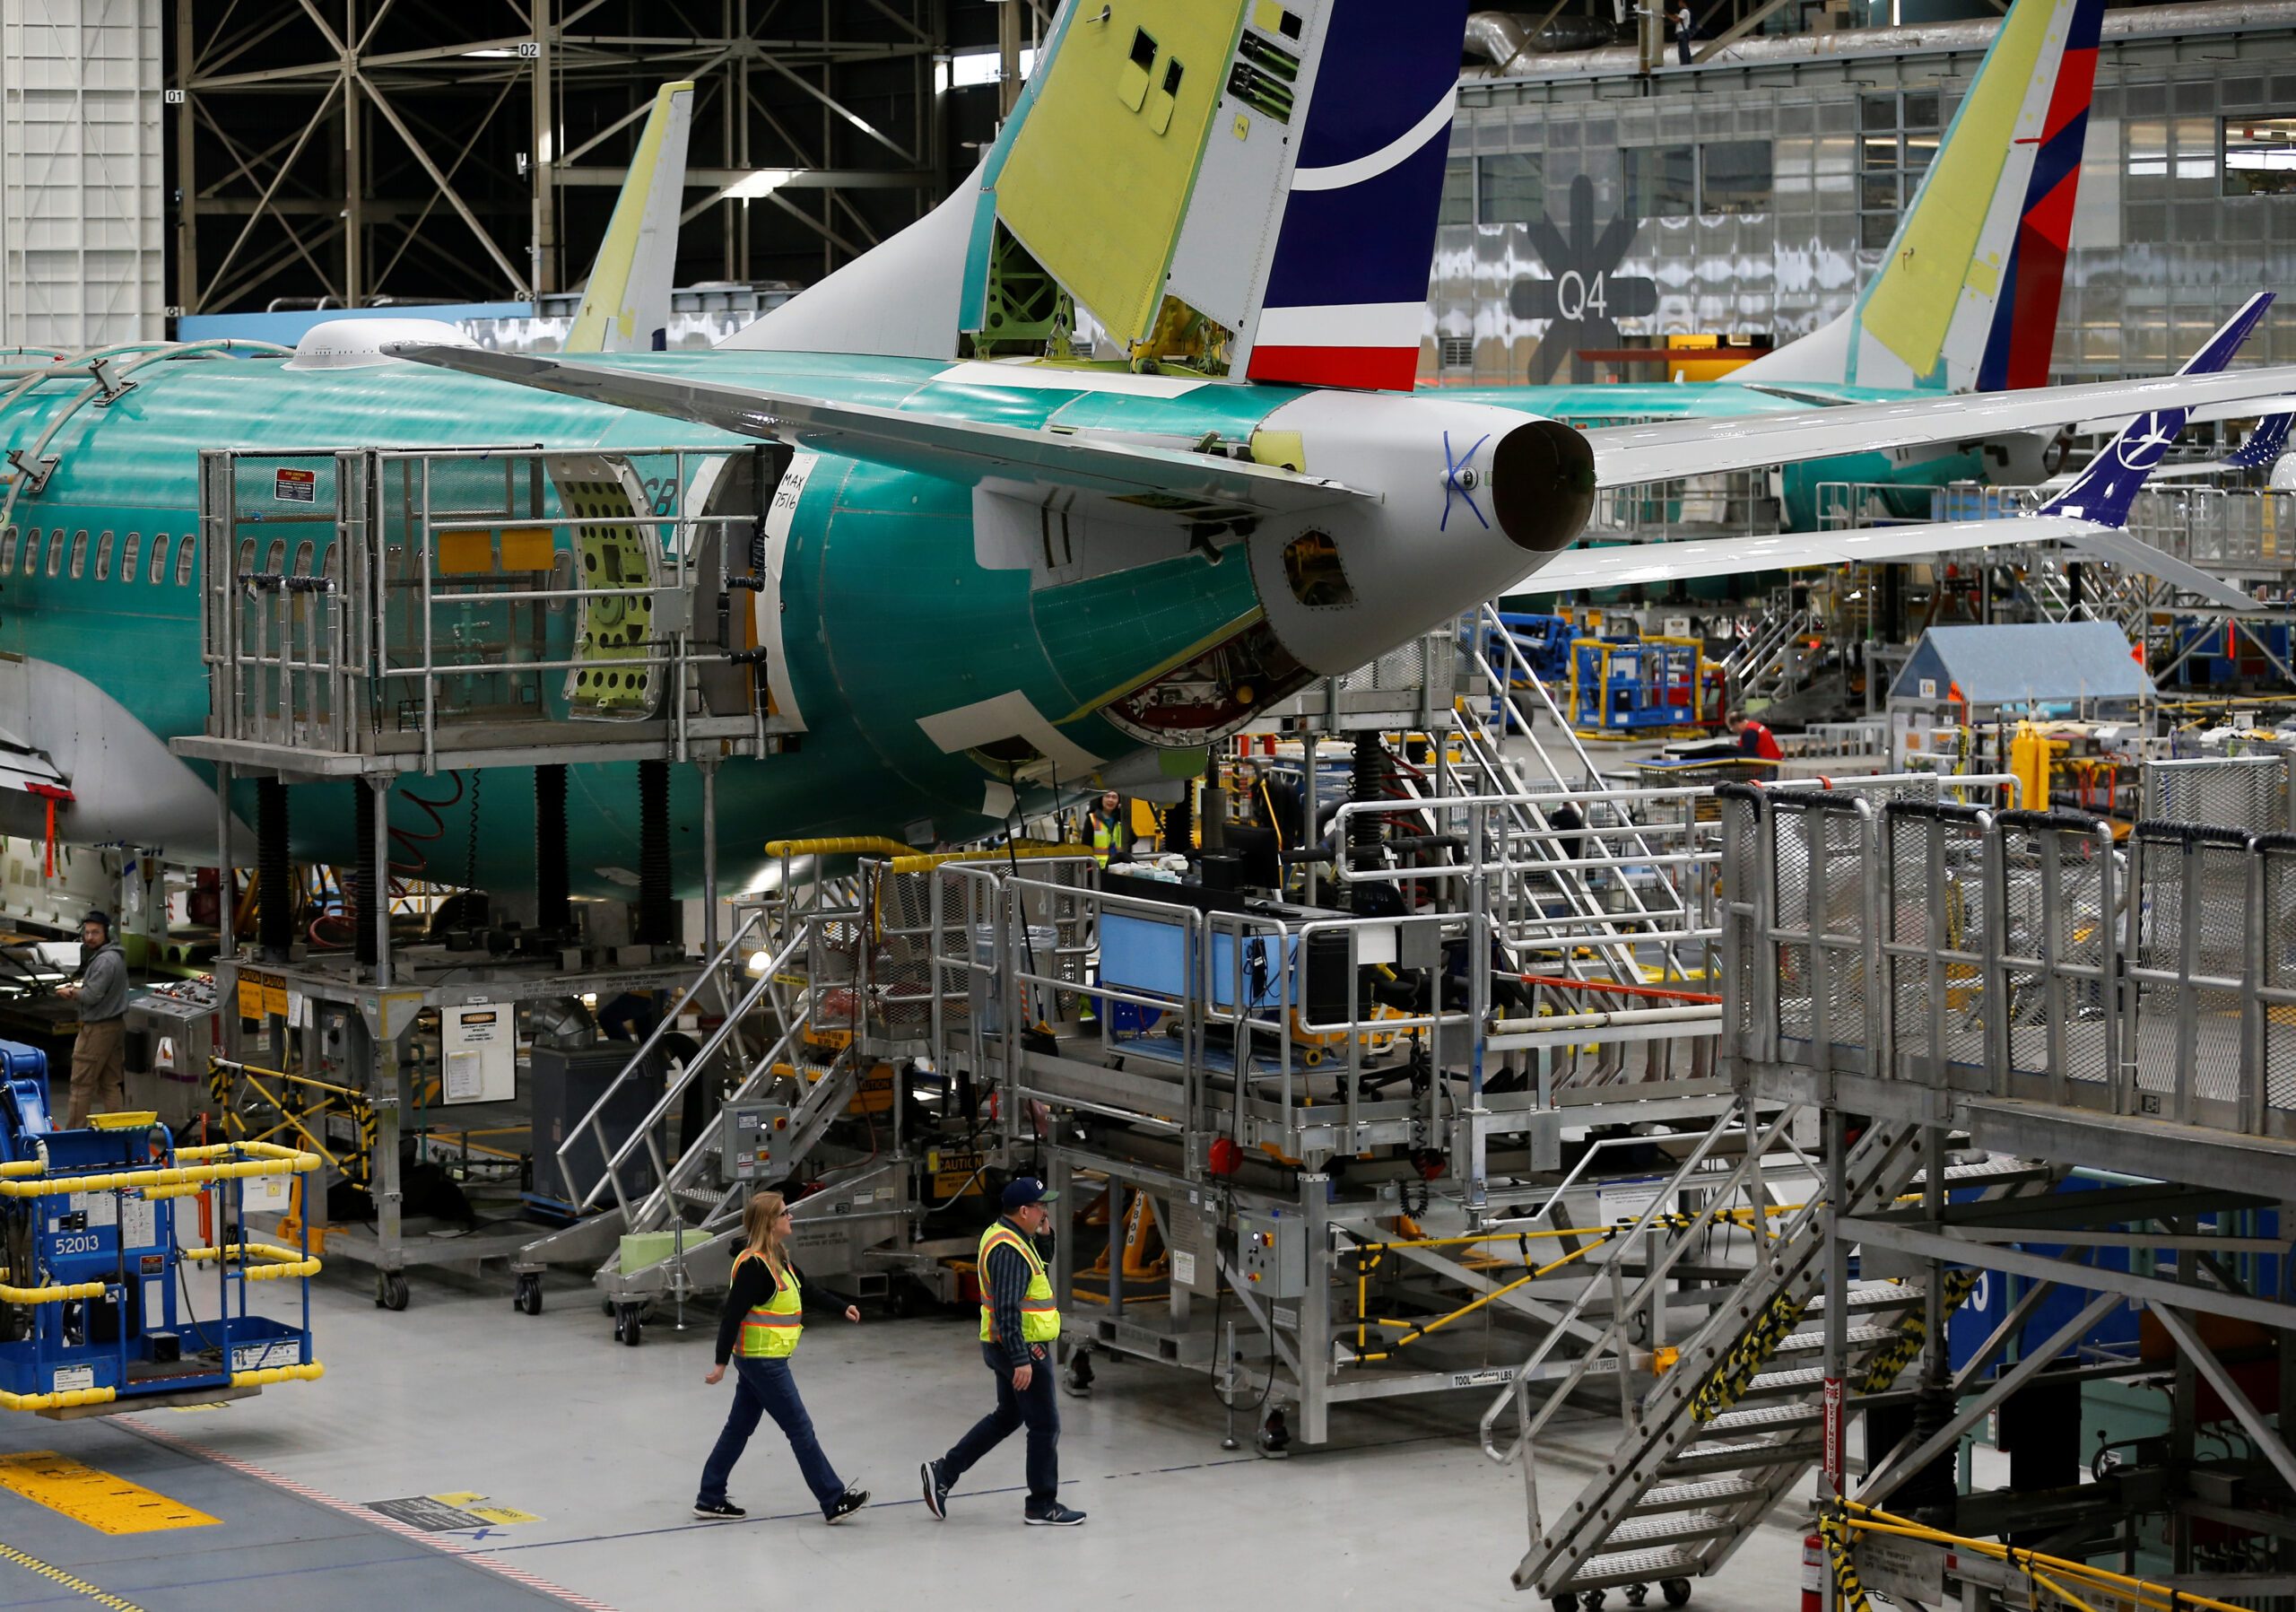 737 Max aircraft under construction at the Boeing factory in Renton, Washington. Dubai aircraft lessor DAE wants Boeing to 'get their act together'